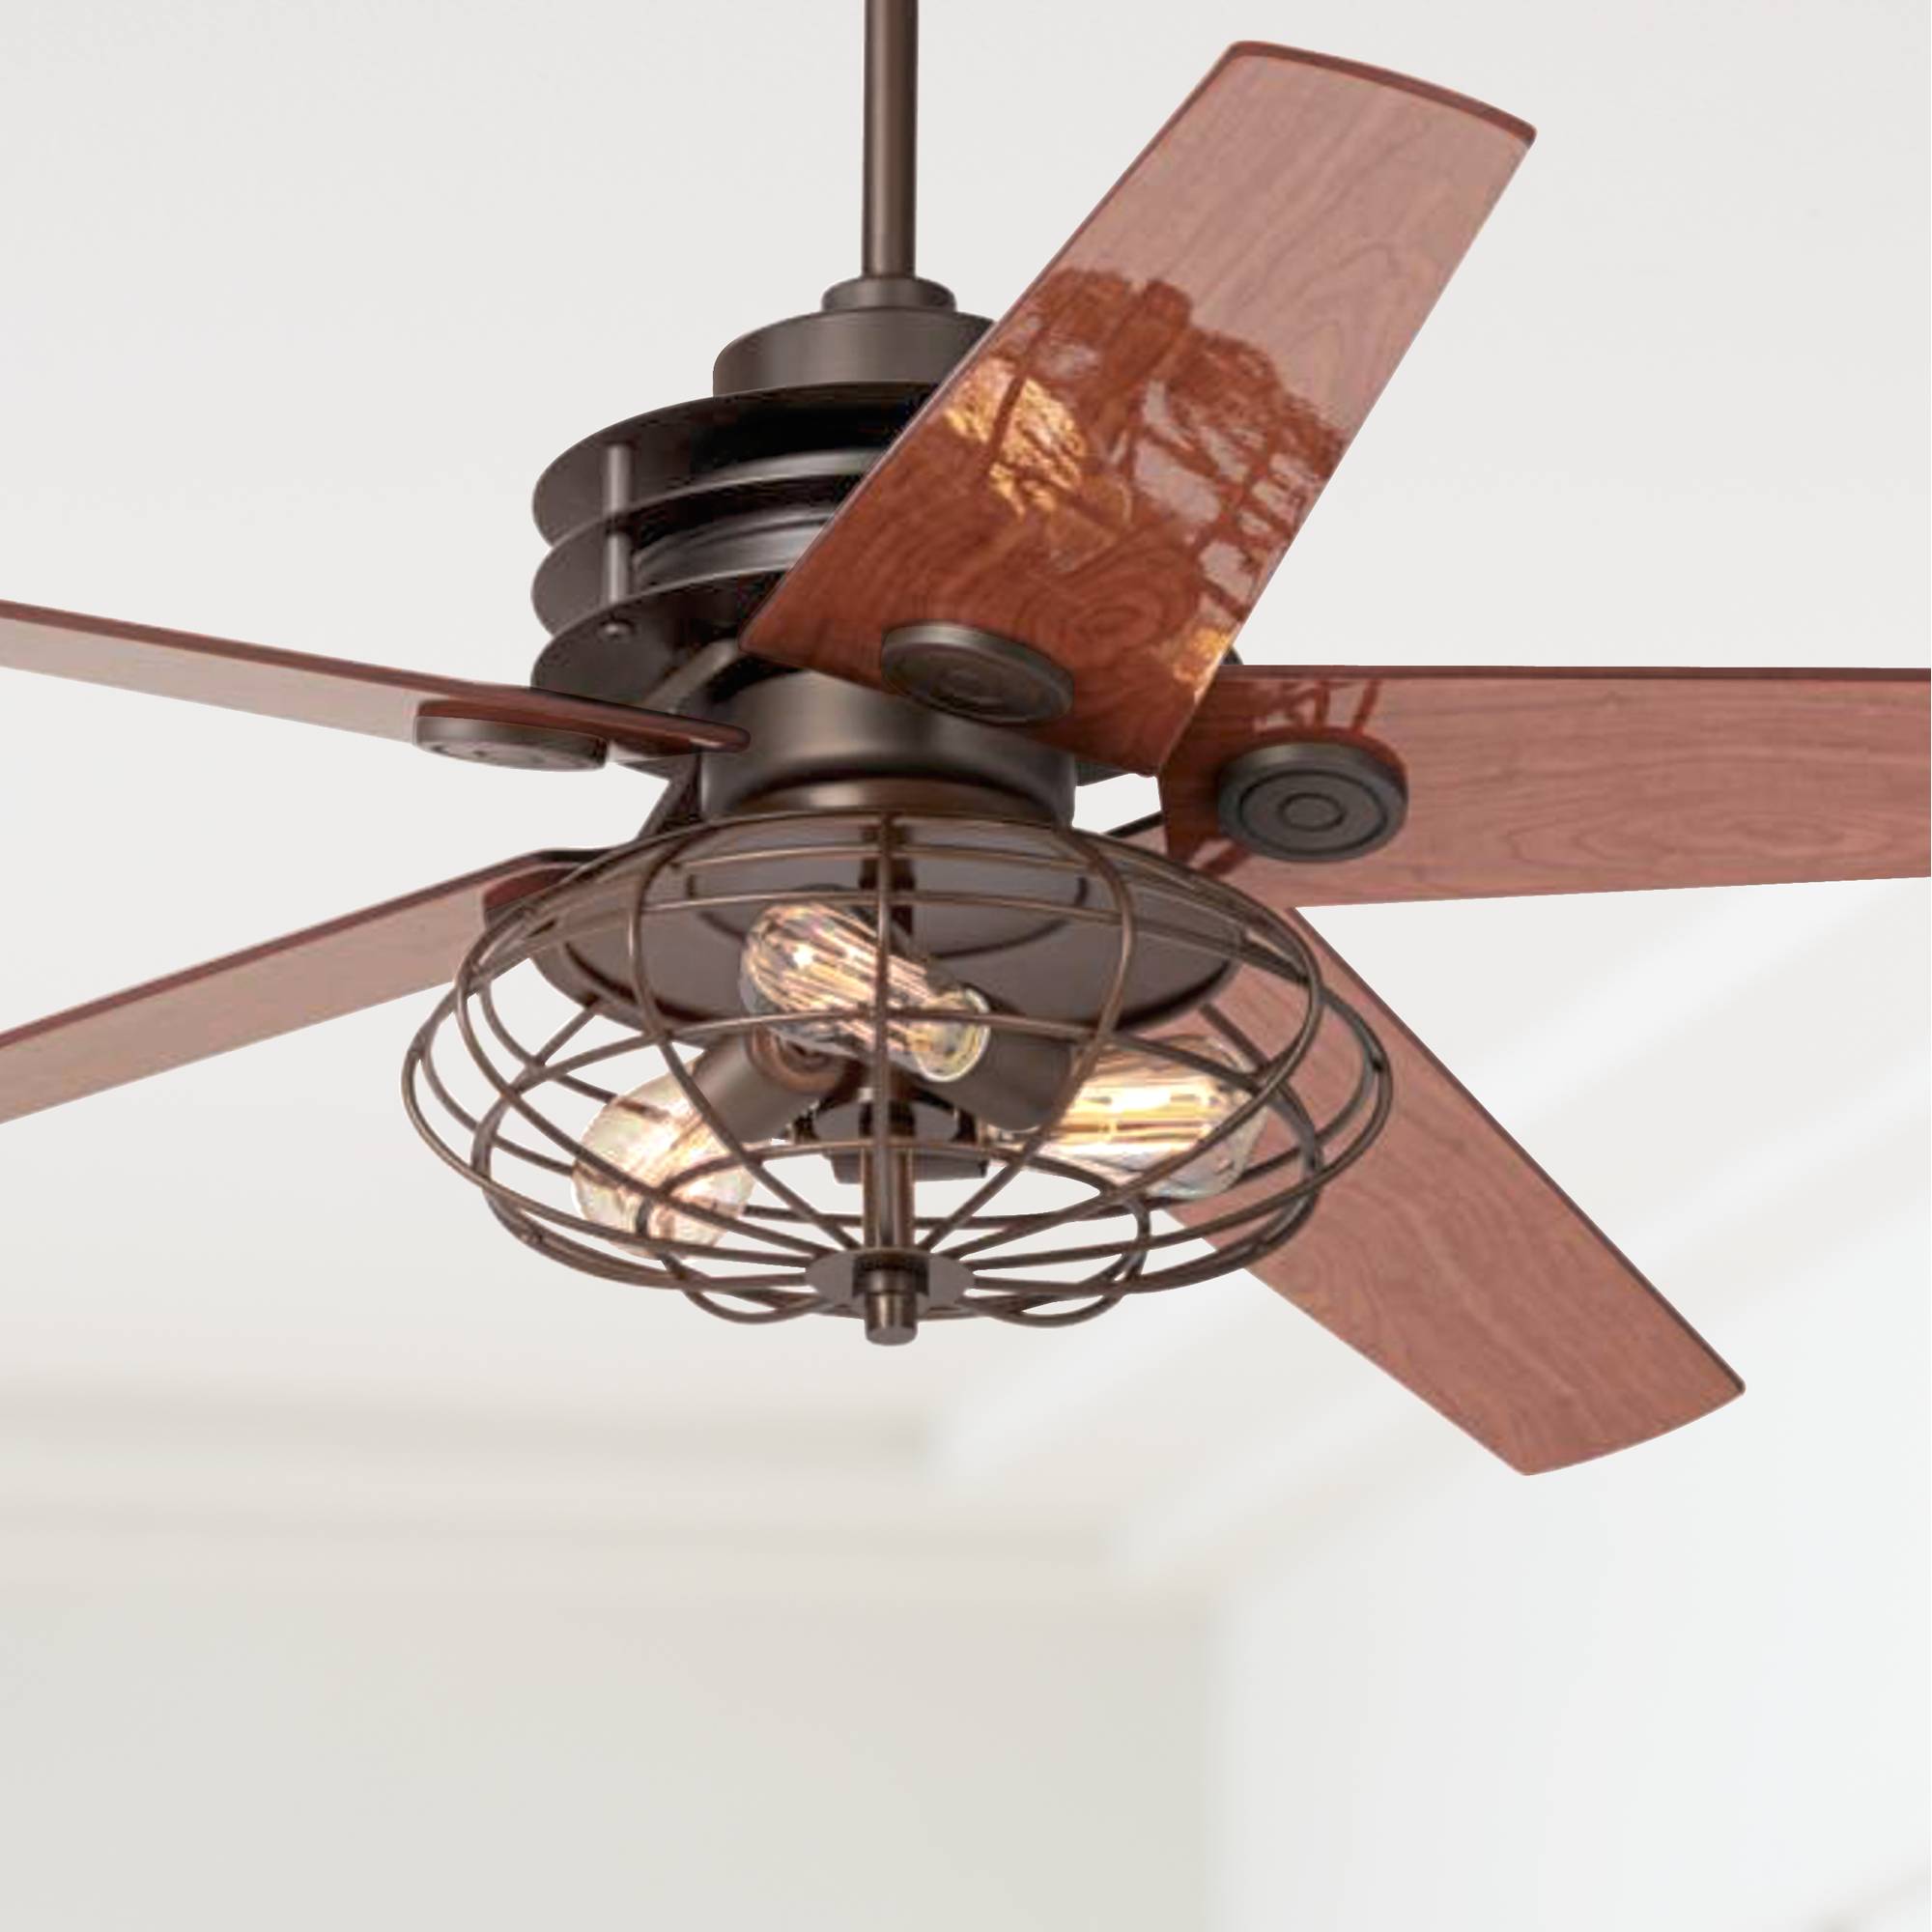 60" Industrial Rustic Ceiling Fan with Light LED Remote ...